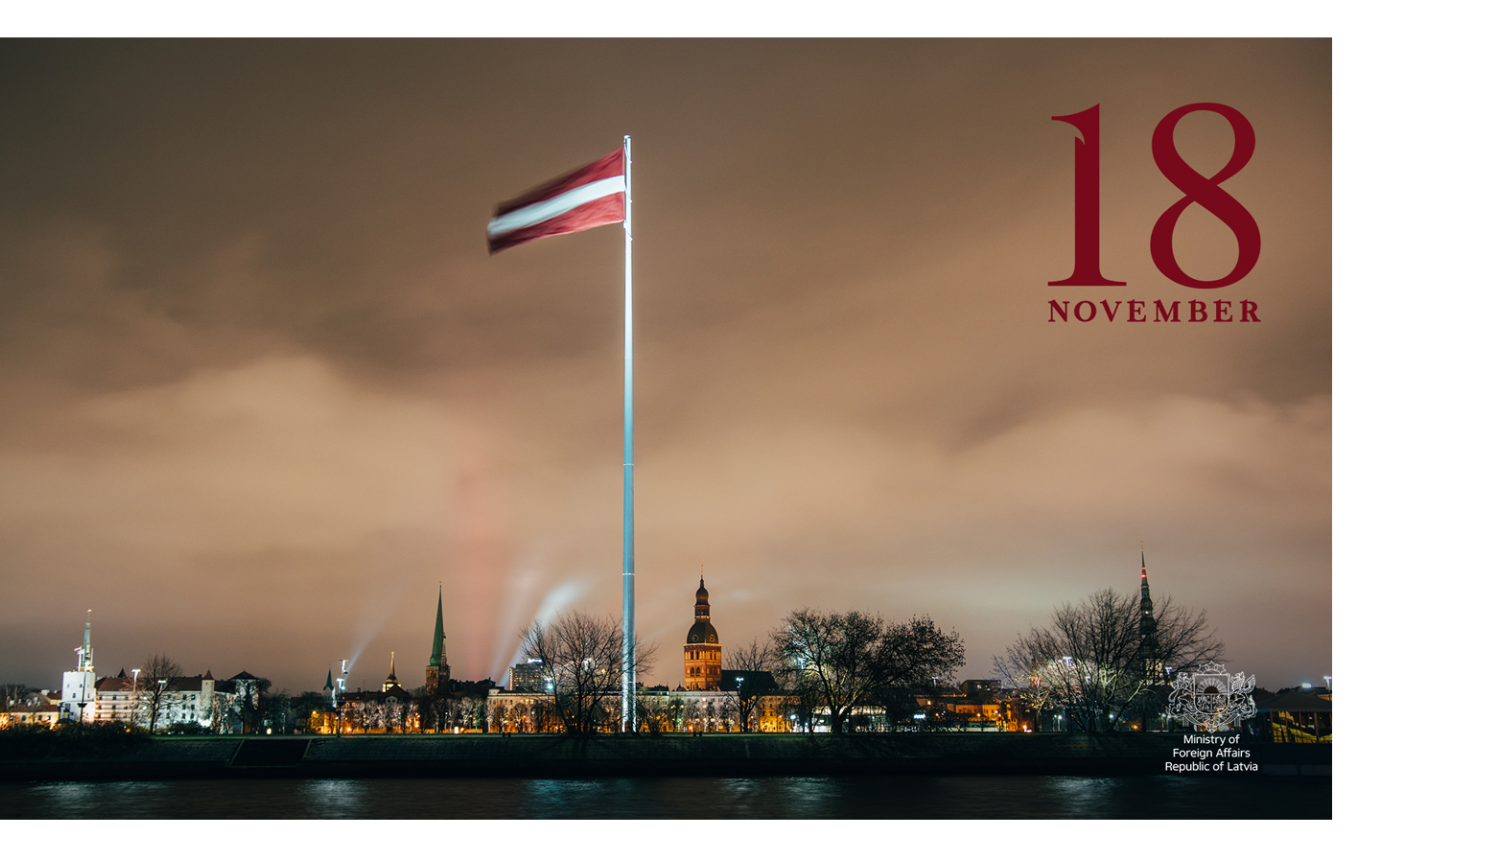 The Foreign Service sends its greetings on Latvia’s National Day